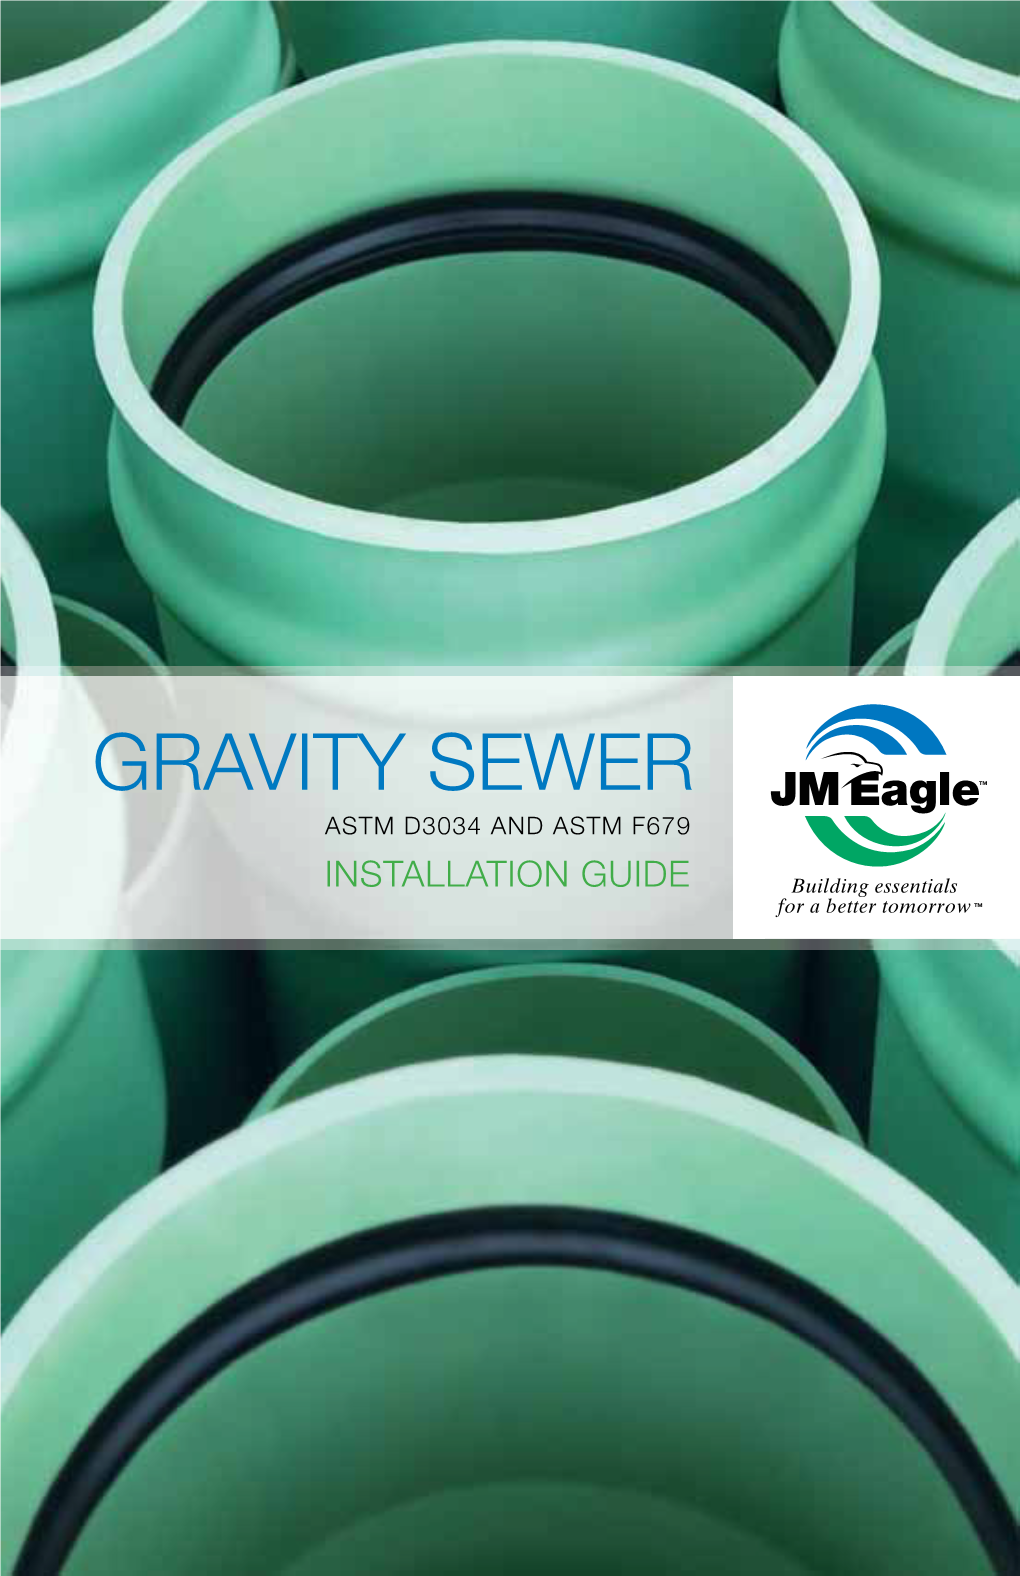 Gravity Sewer Installation Guide 9